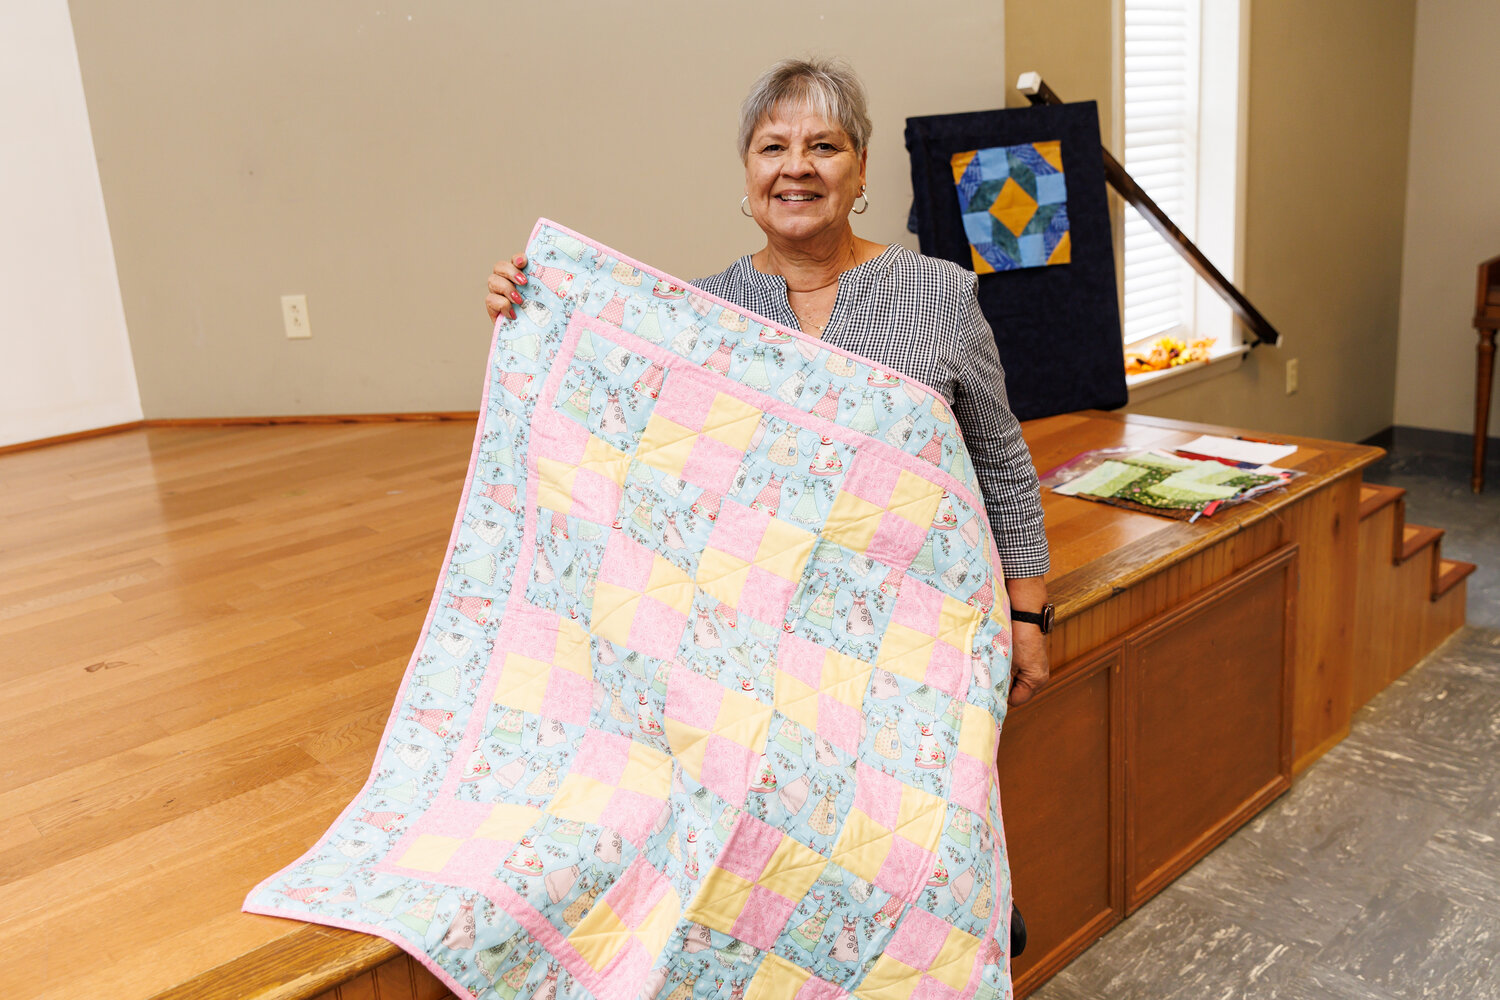 Carol Starnes shares a quilt she made as a donation to the NICU. Photo: Tony Wooten